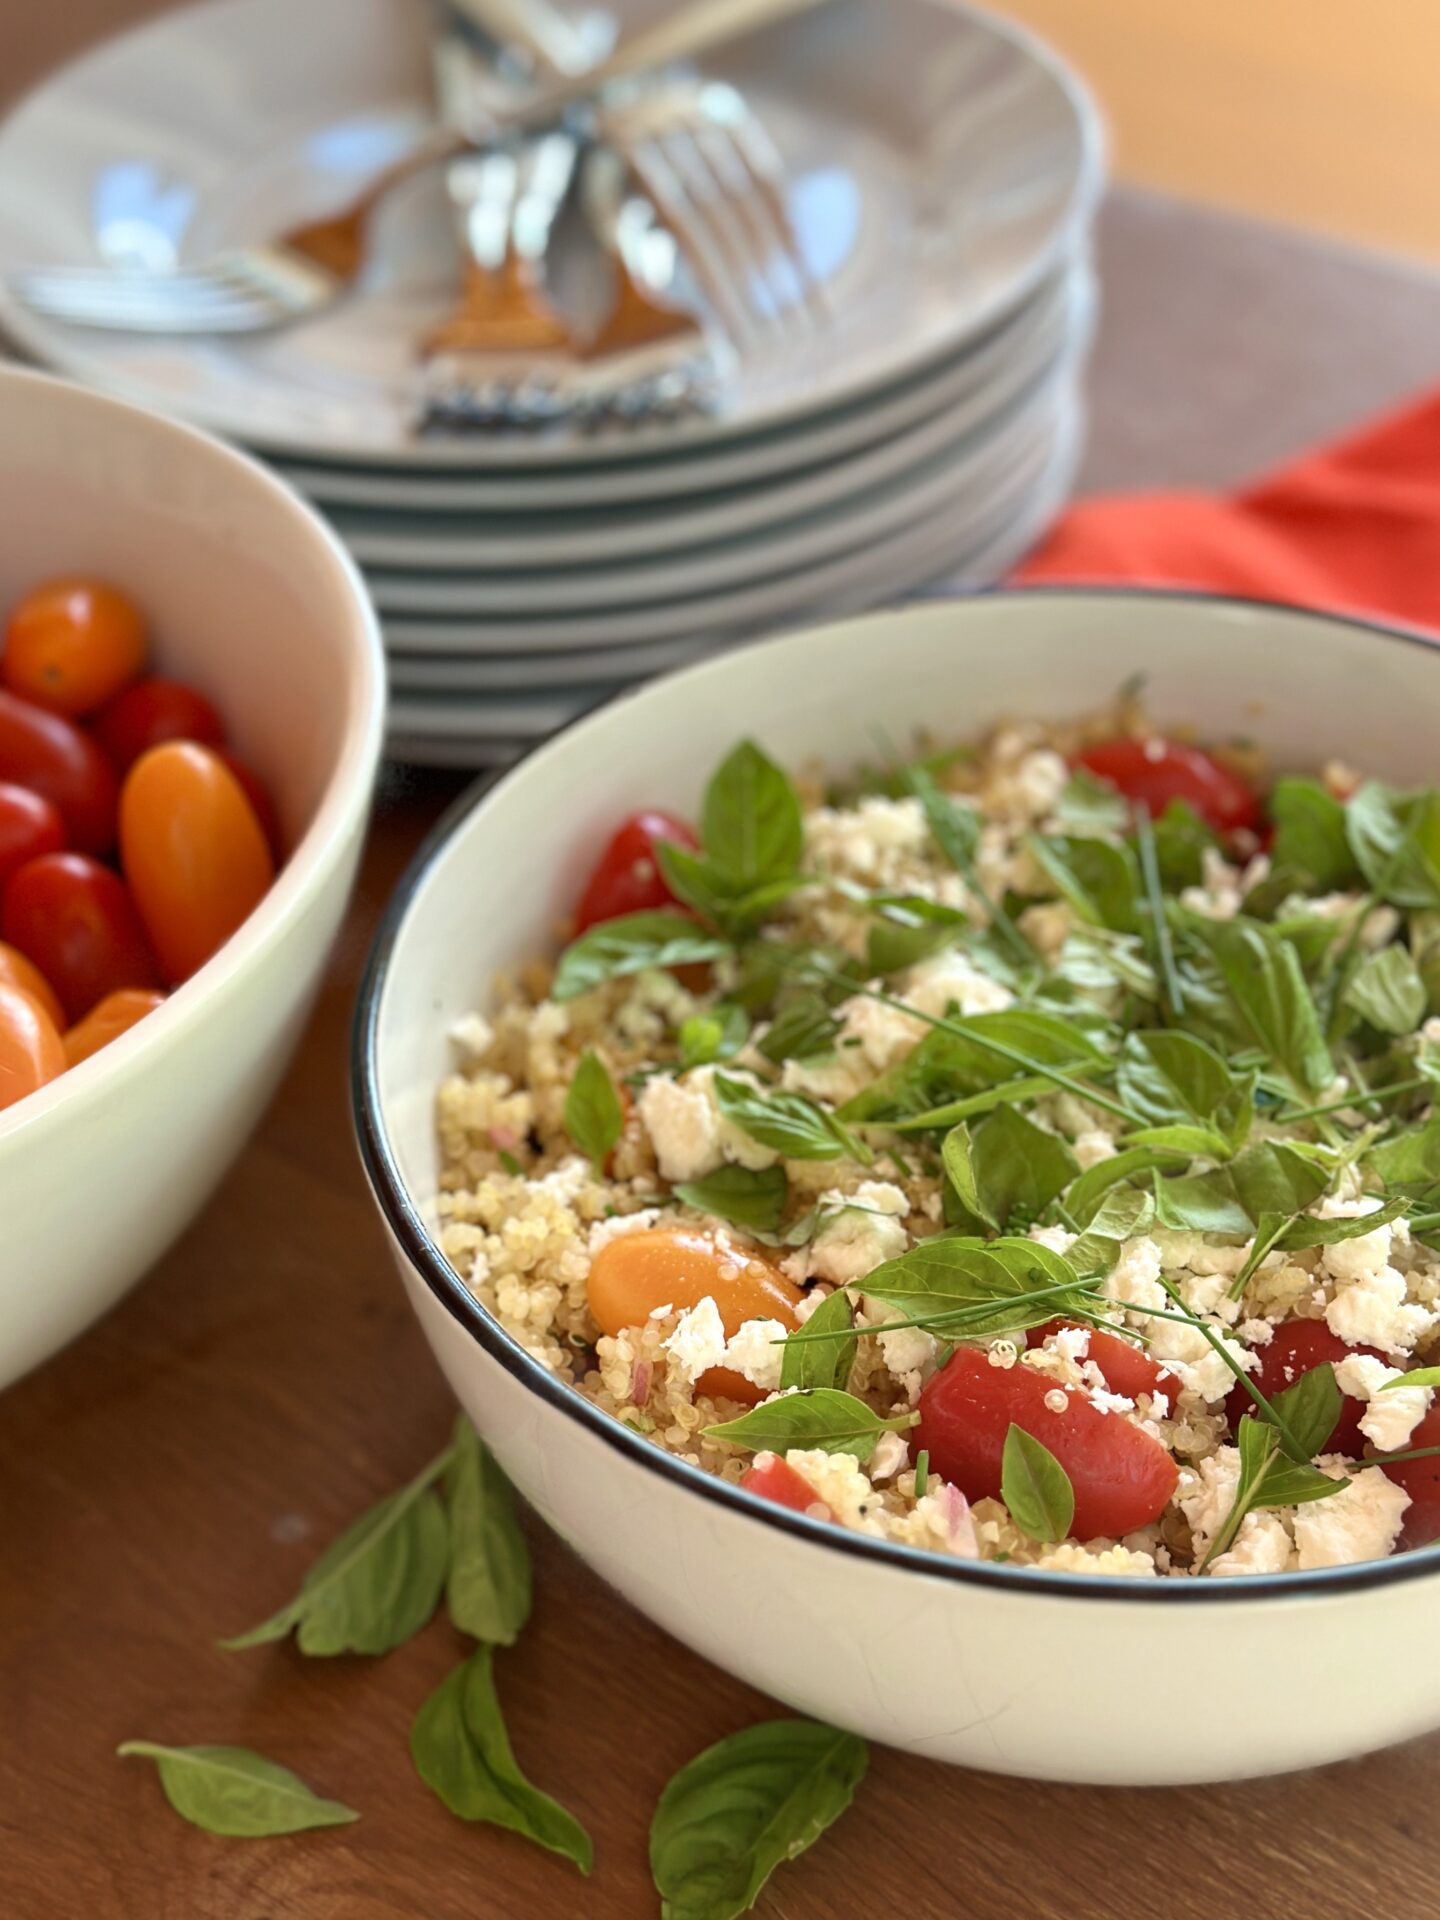 A large white bowl of cherry tomato quinoa salad garnished with fresh basil is seen, with a stack of white plates and forks in the background